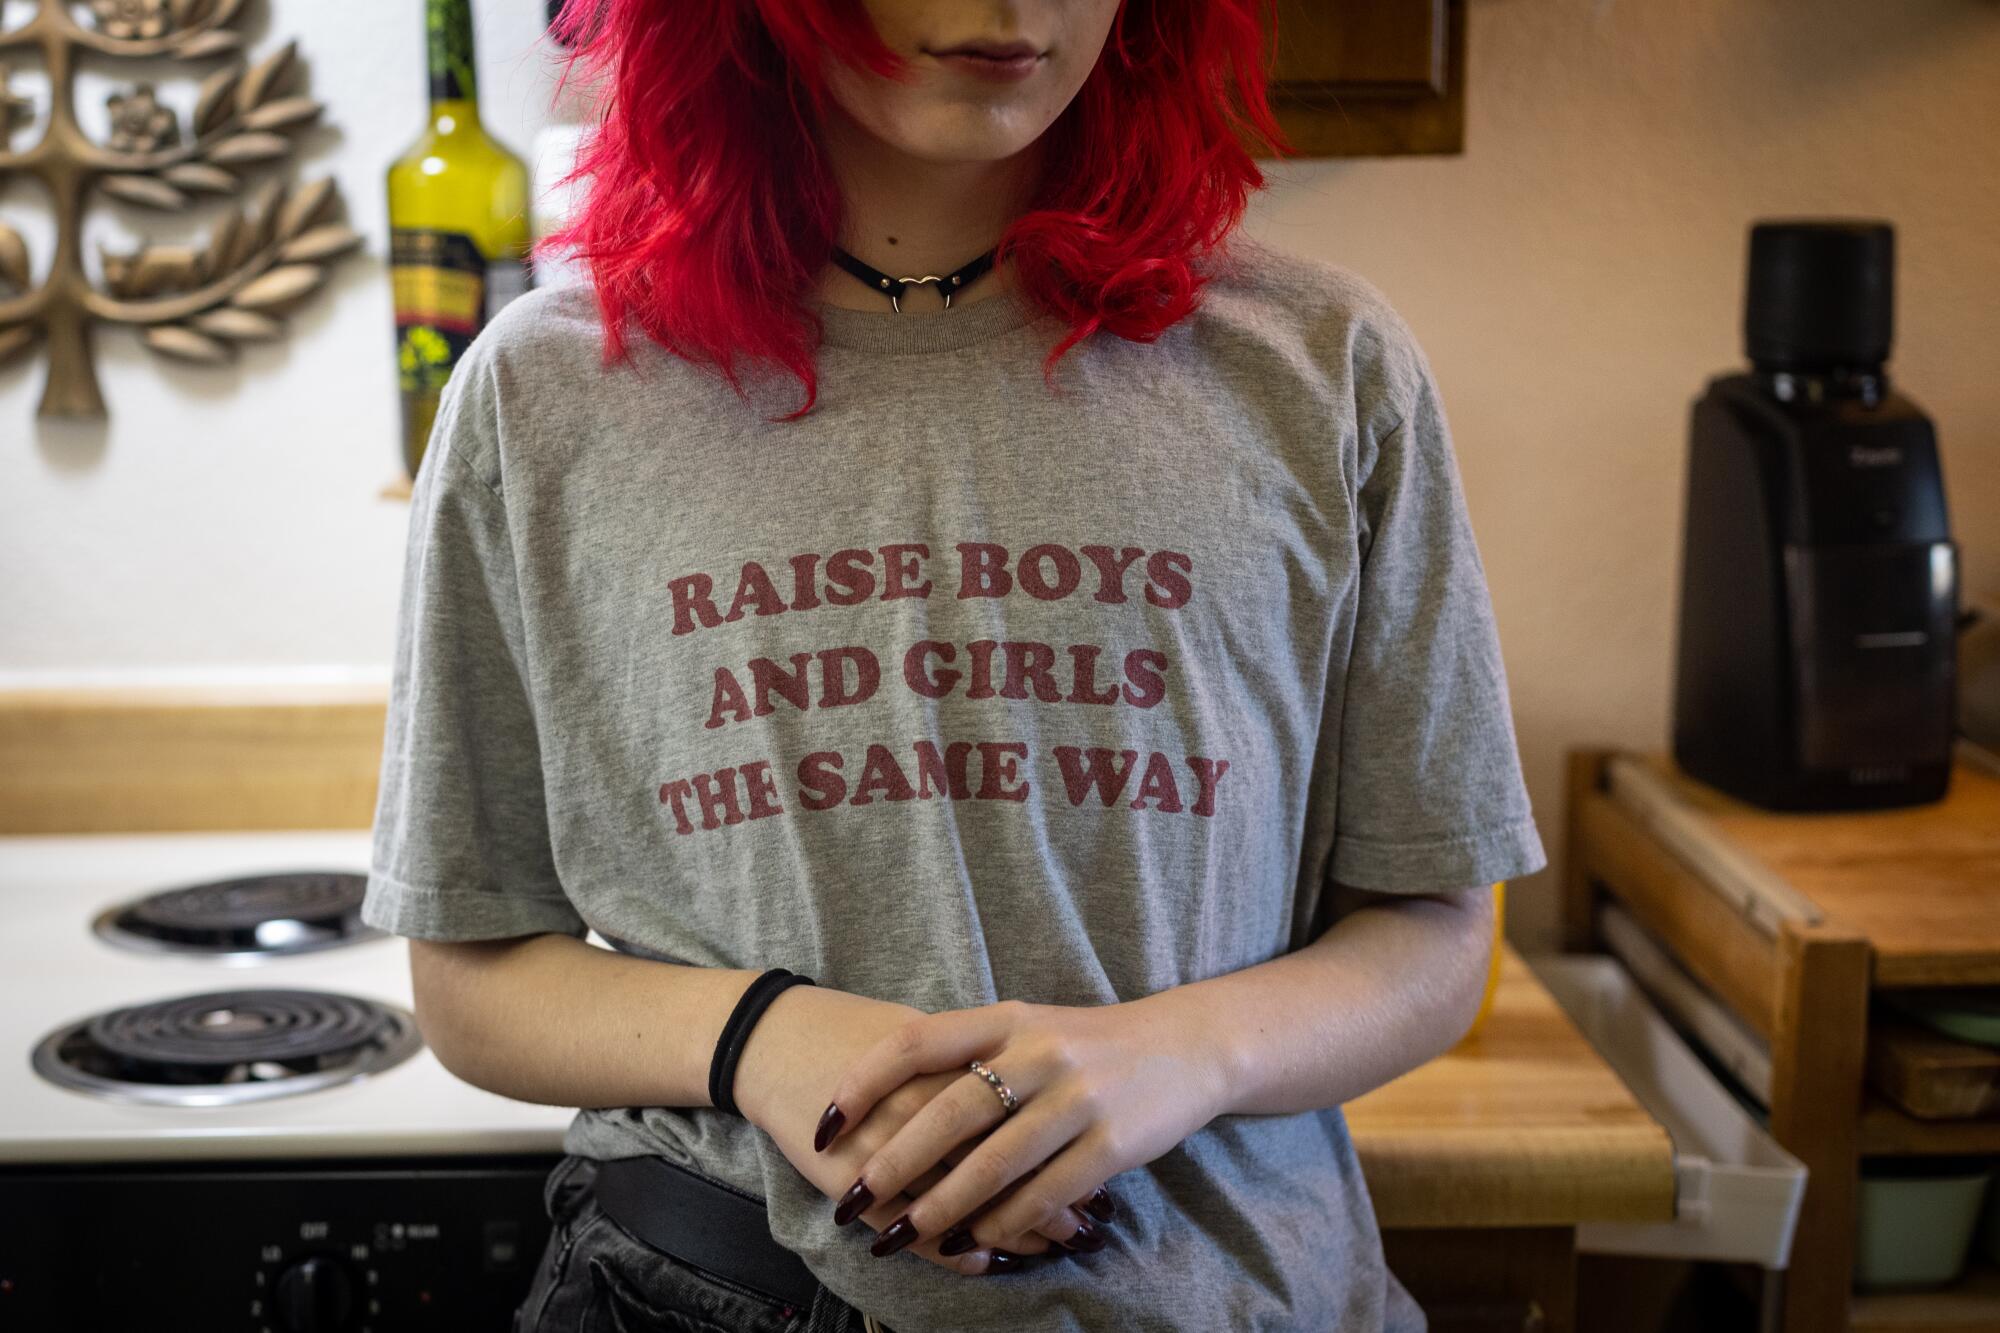 Milo Easley wears a T-shirt reading "Raise boys and girls the same way."